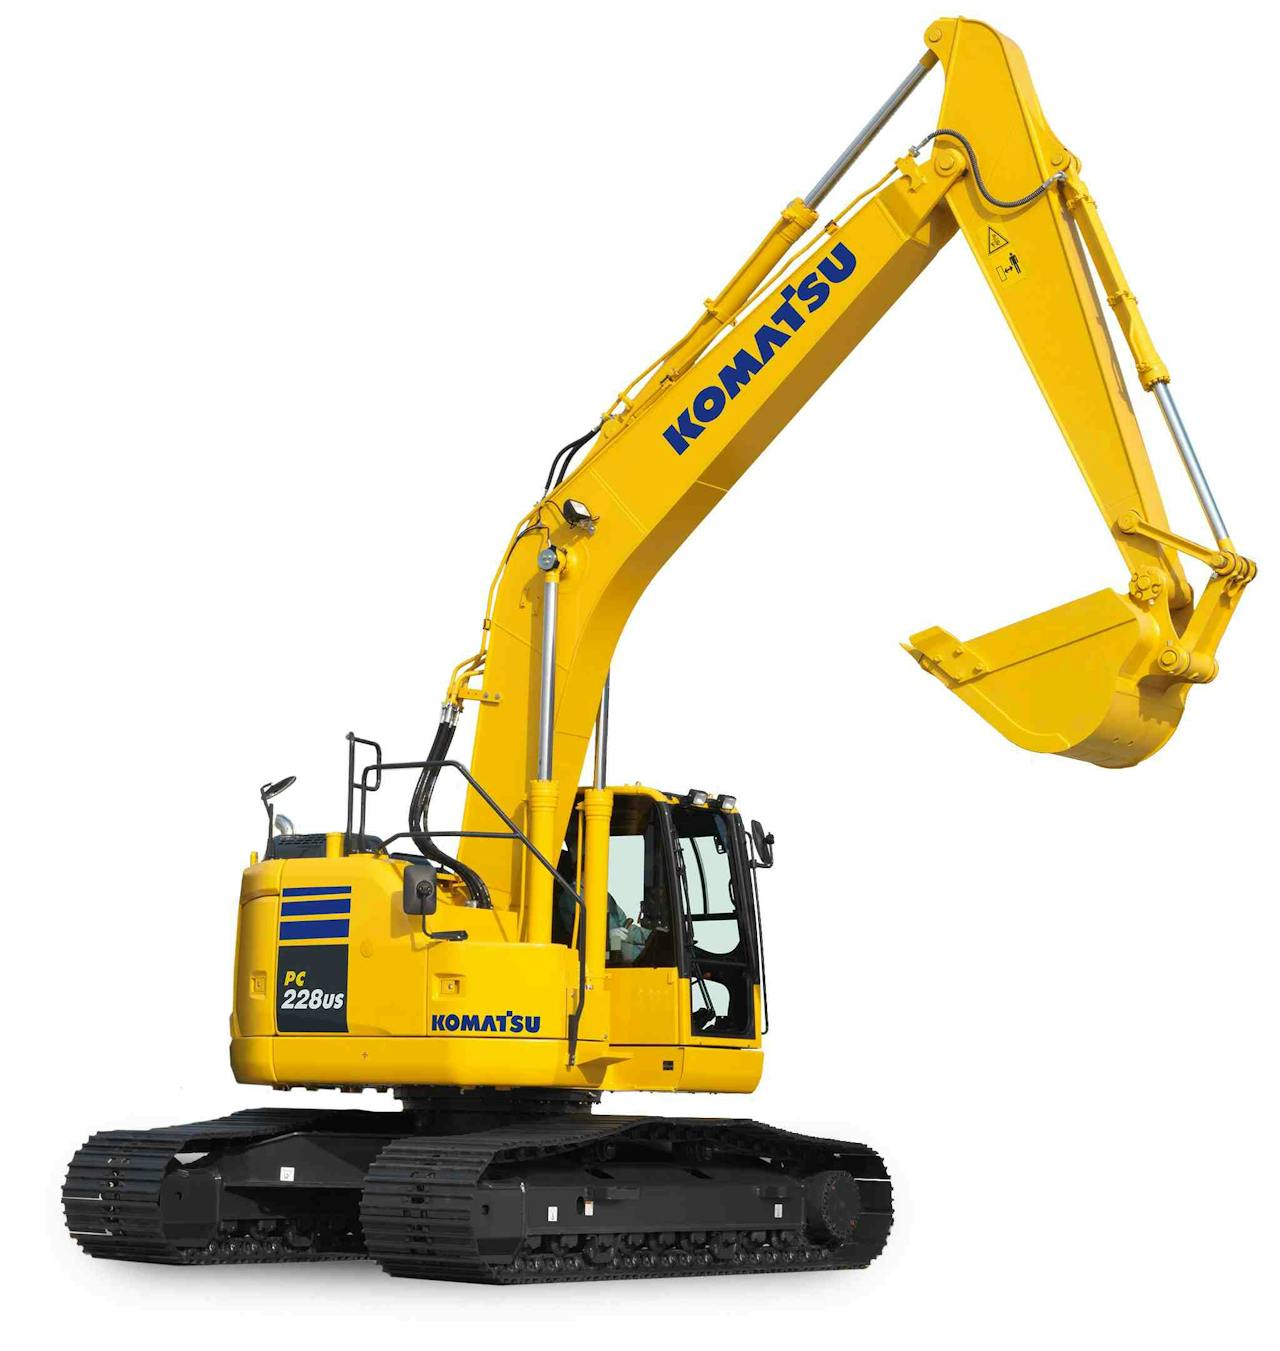 Komatsu Rolls Out 6 New Hydraulic Excavators 2 Dozers And An Articulated Dump Truck At Conexpo Equipment World